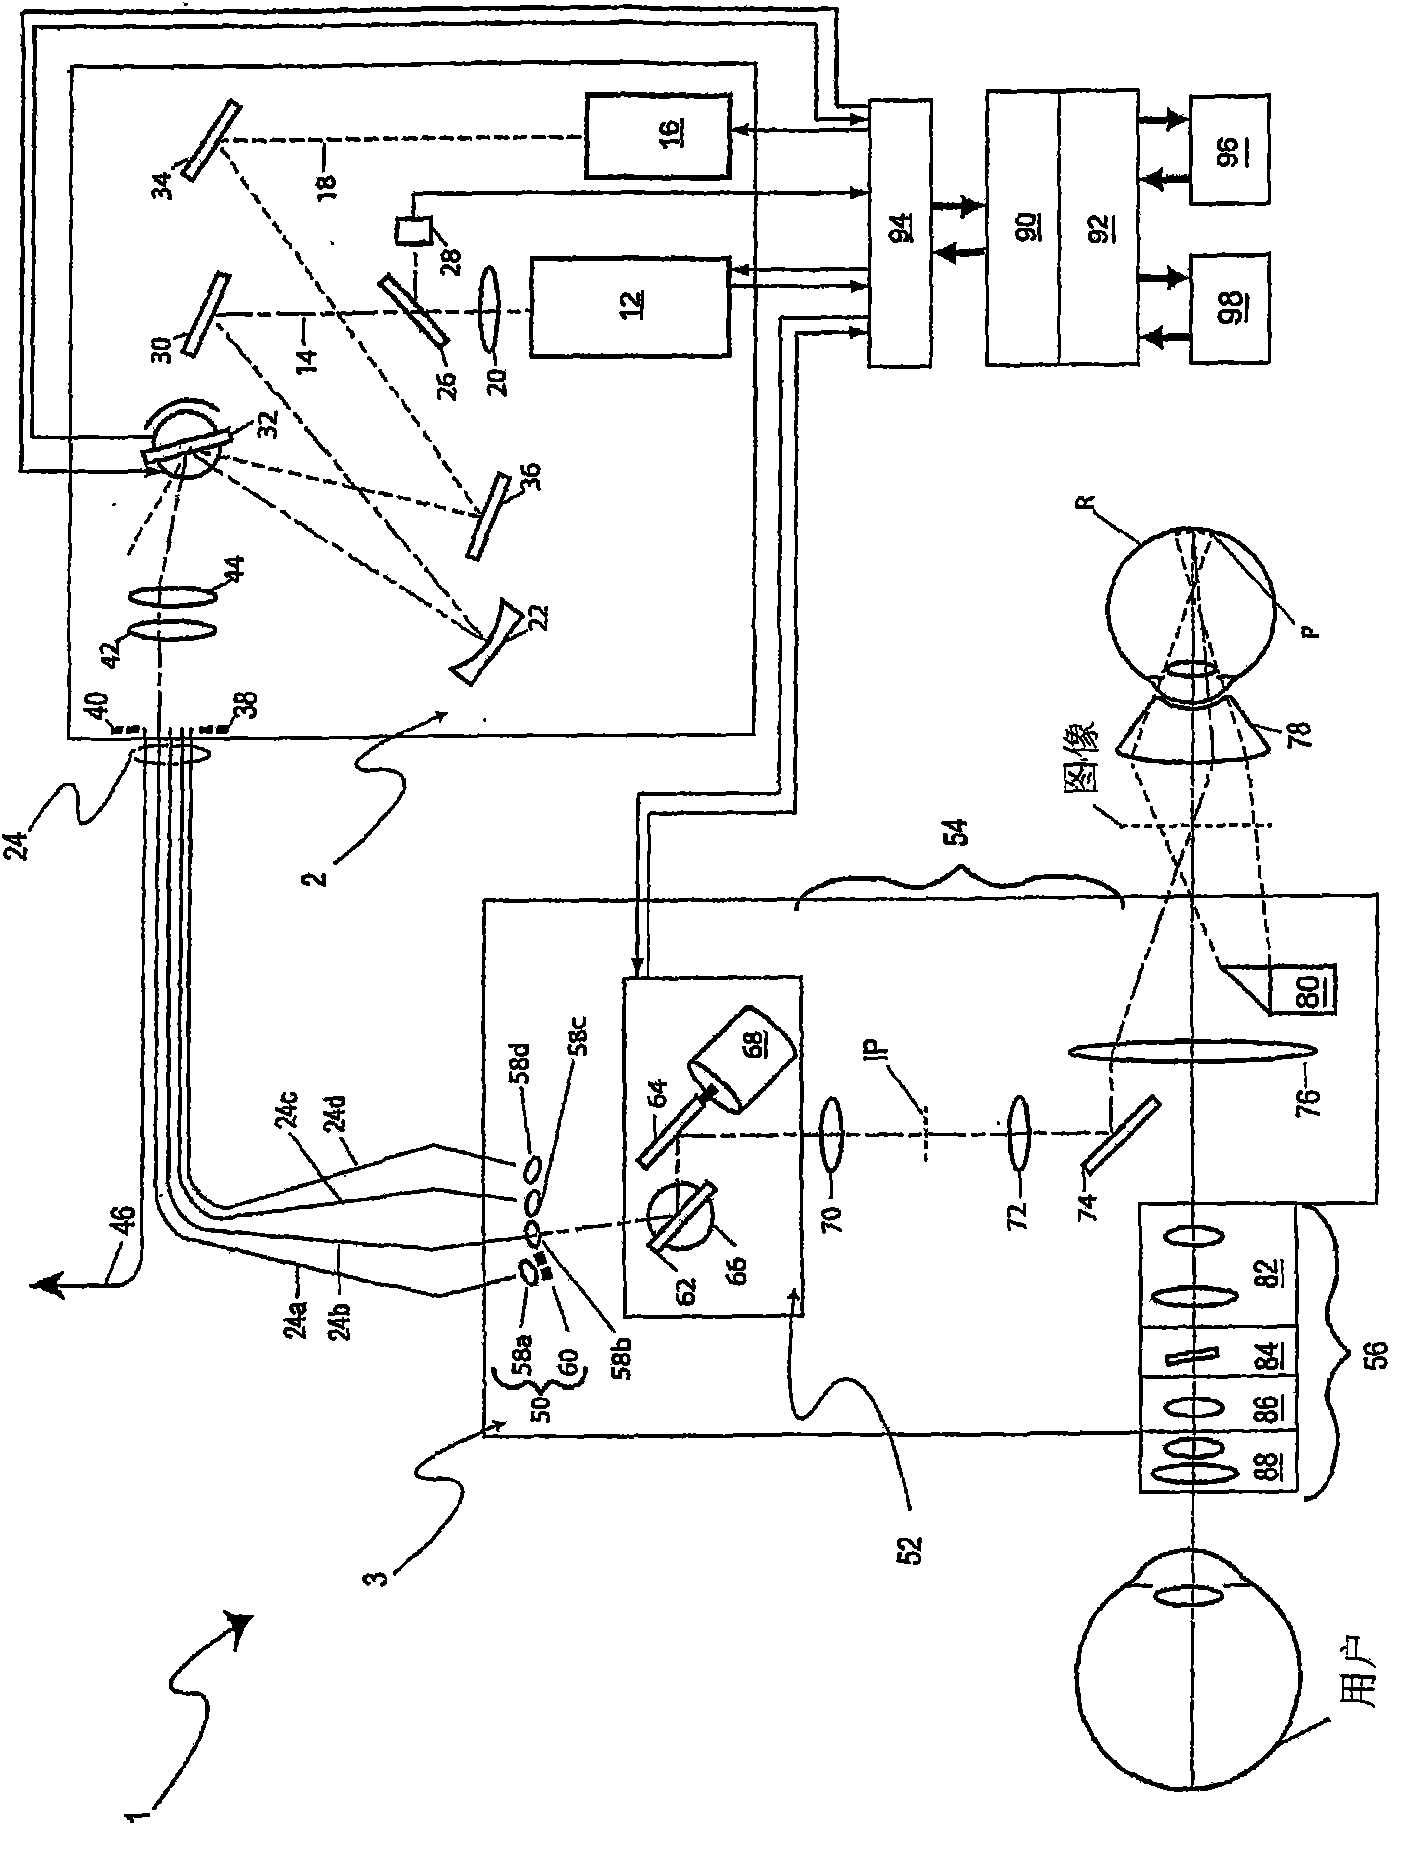 System and method for generating treatment patterns